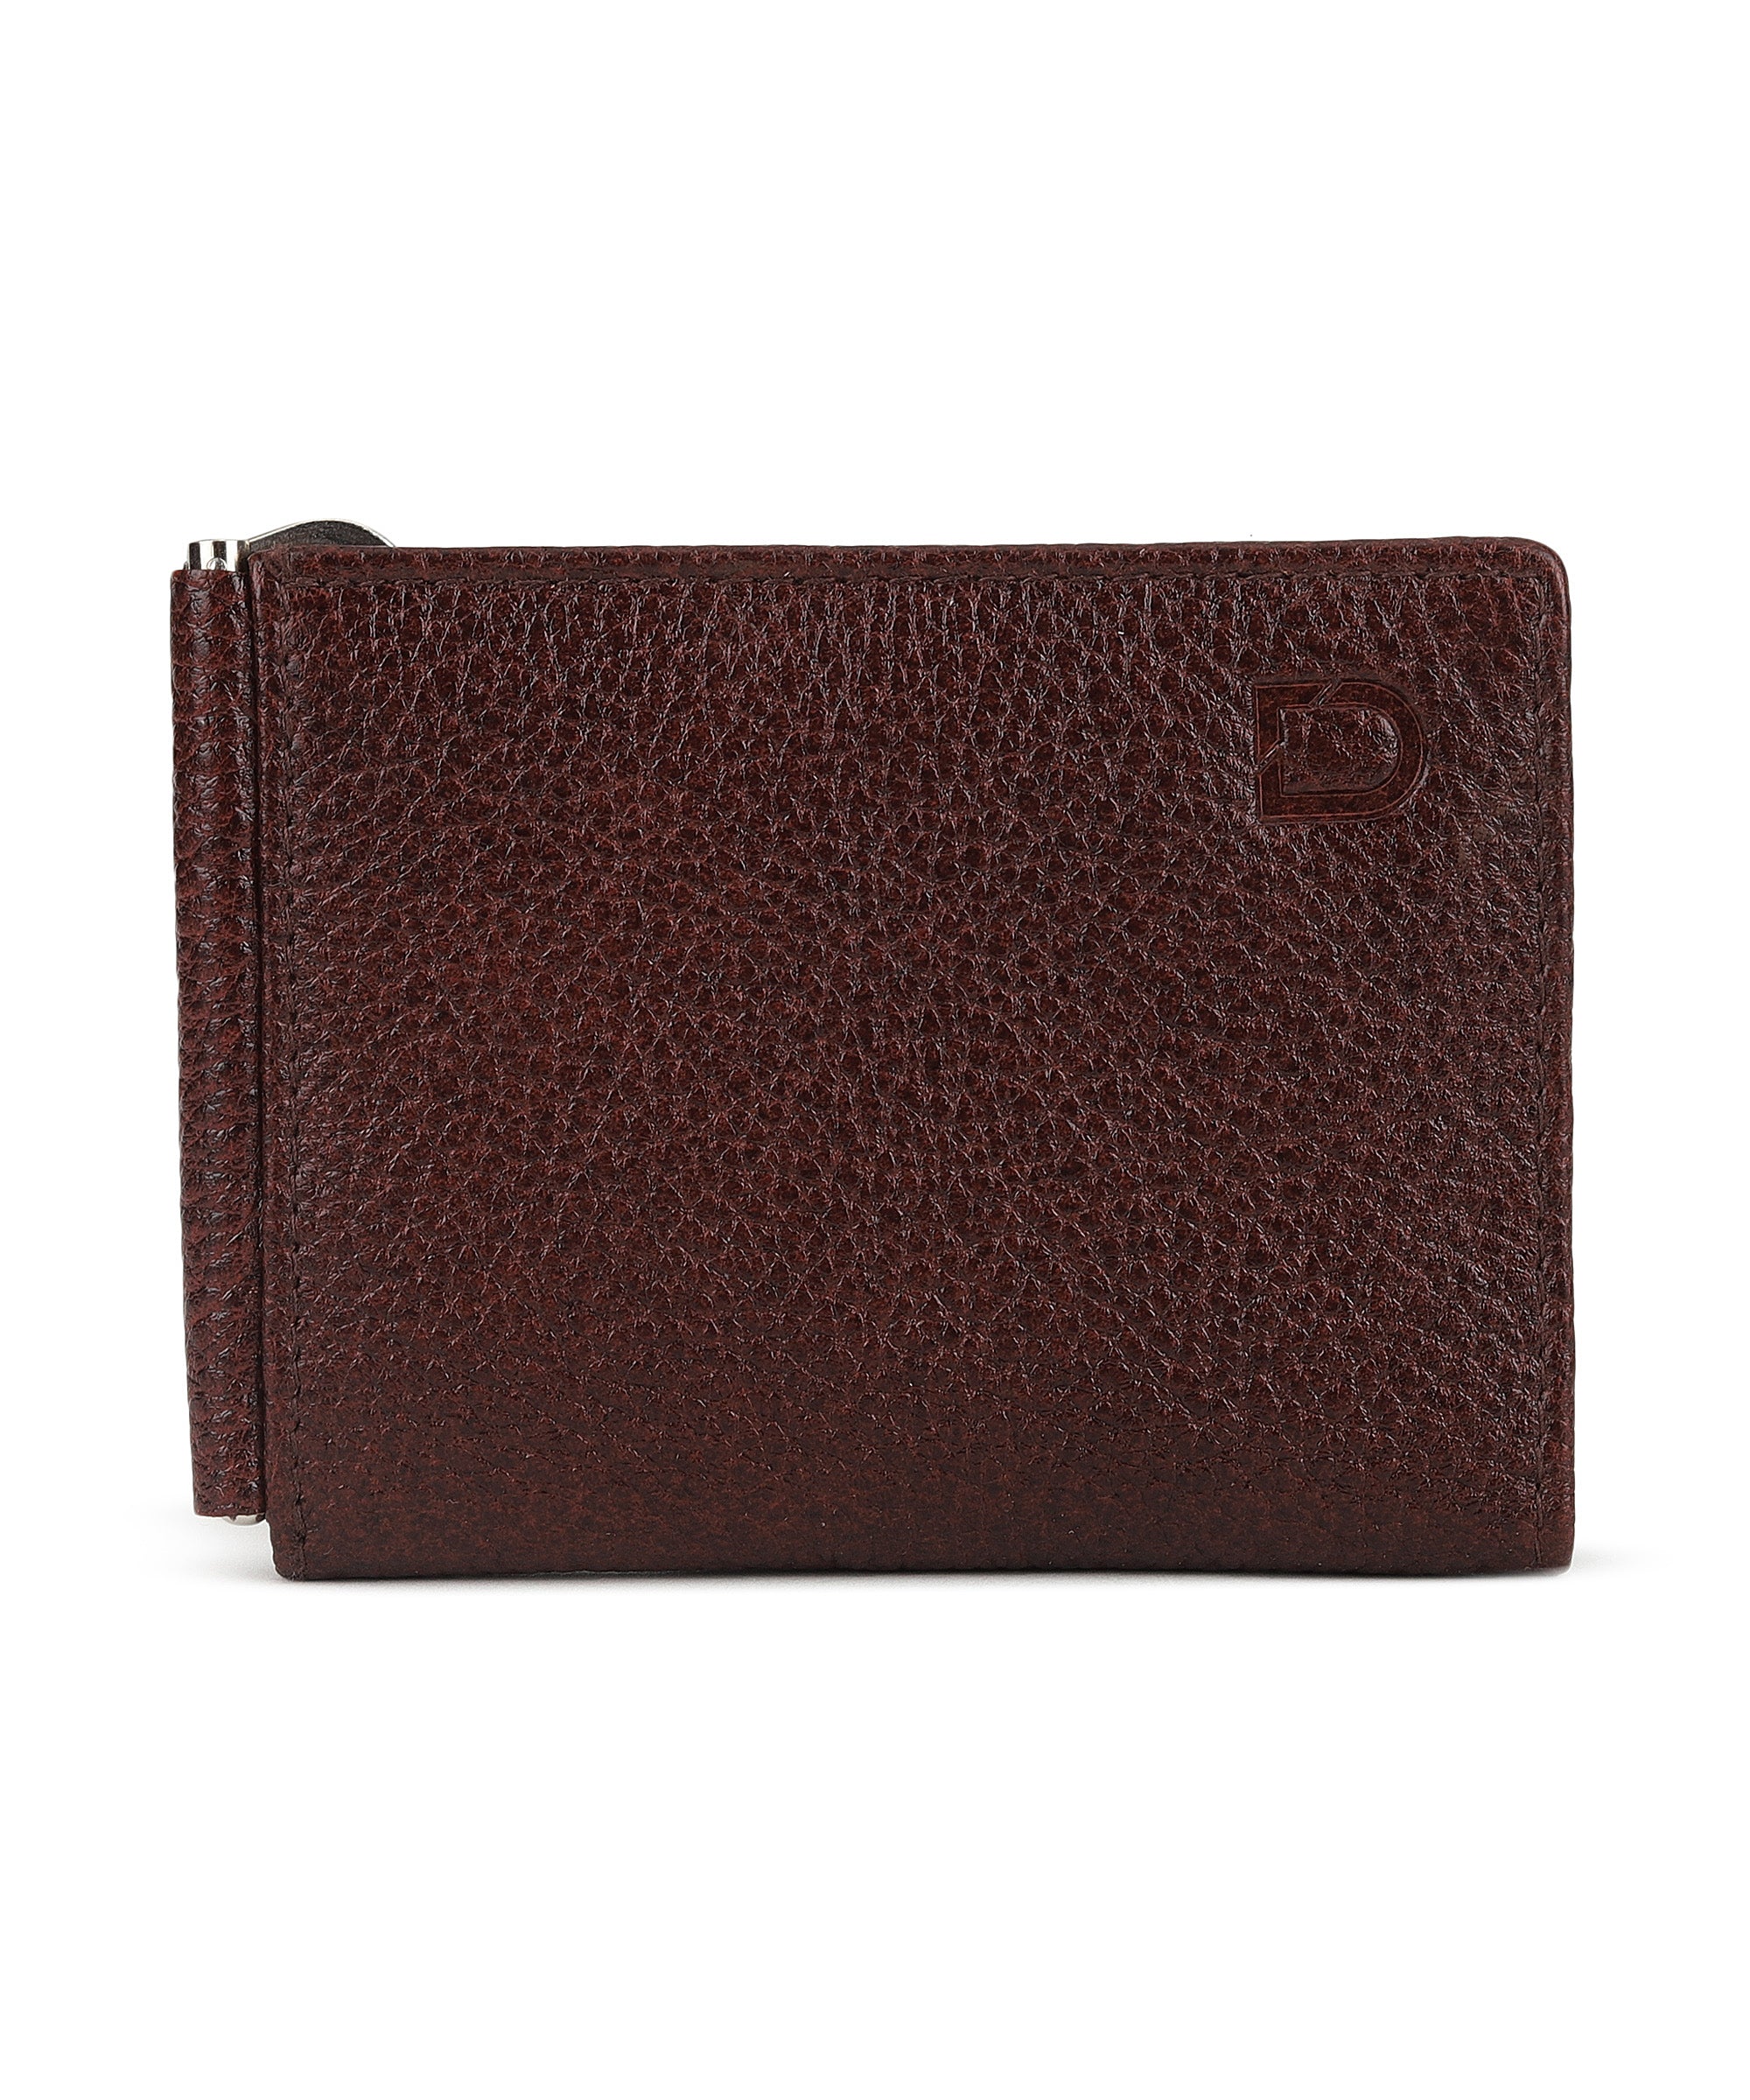 Urbano Fashion Men's Casual, Formal Brown Genuine Leather Wallet-4 Card Slots